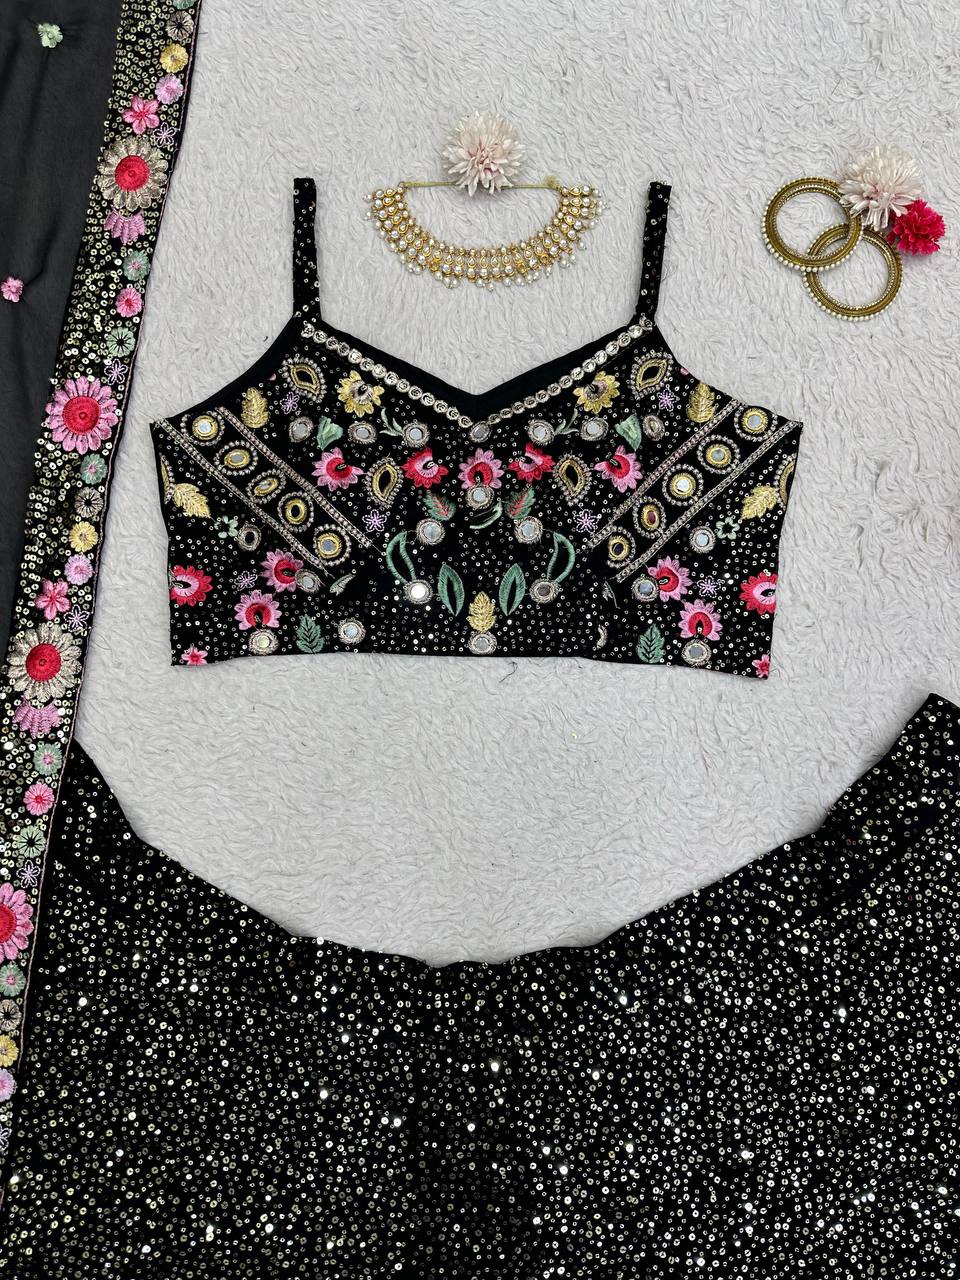 Black Color Georgette Sequence Work Lehenga Choli For Wedding Wear For Woman